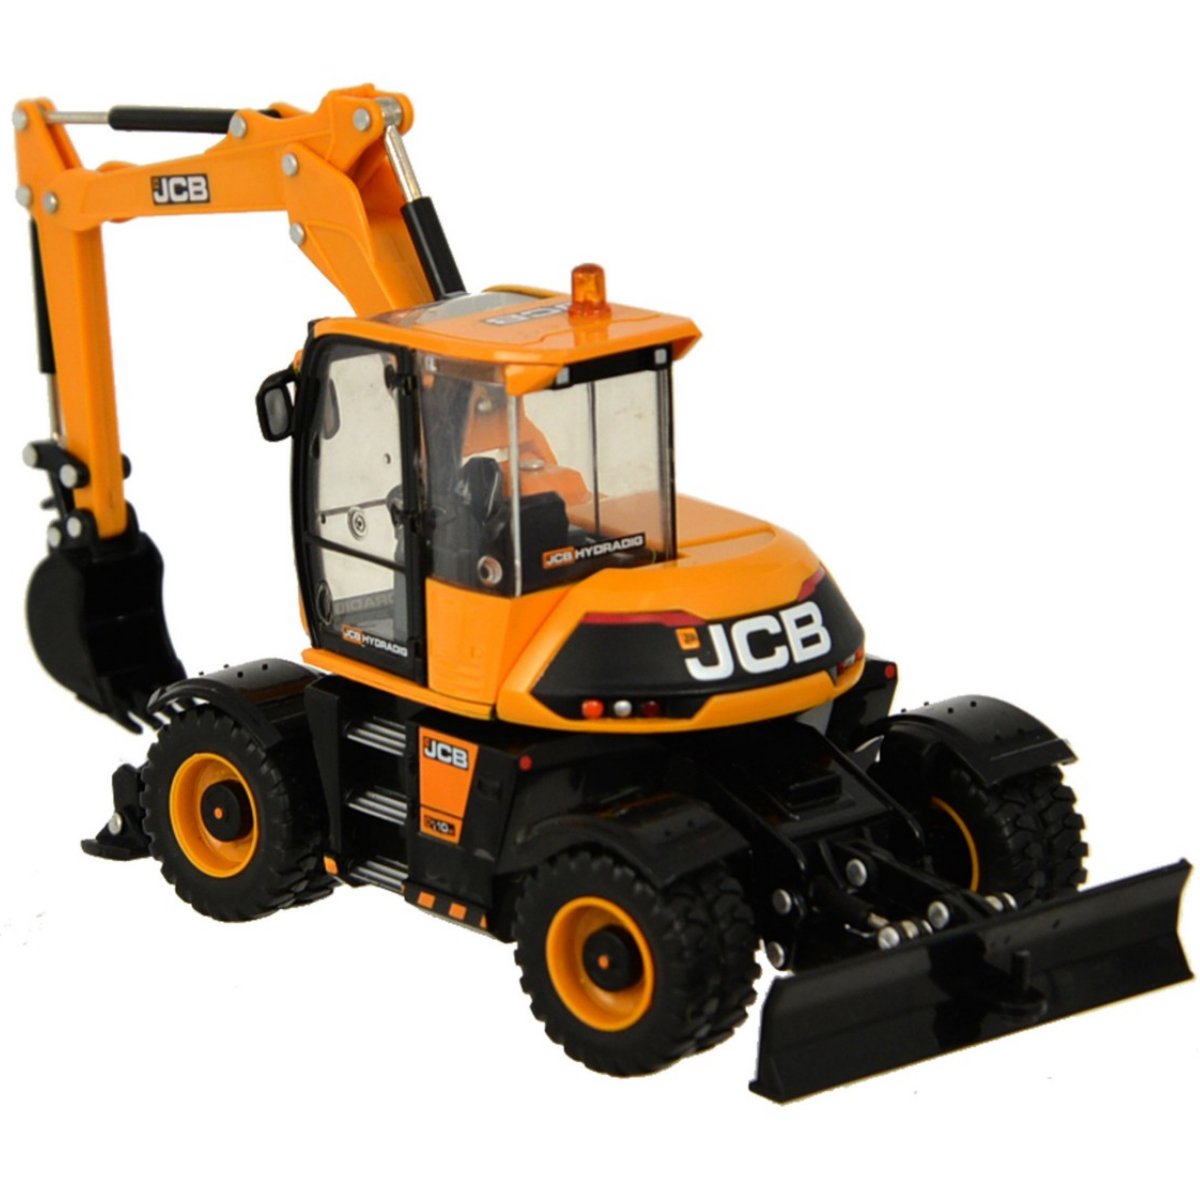 Britains JCB Hydradig - 1:32 Scale - Phillips Hobbies